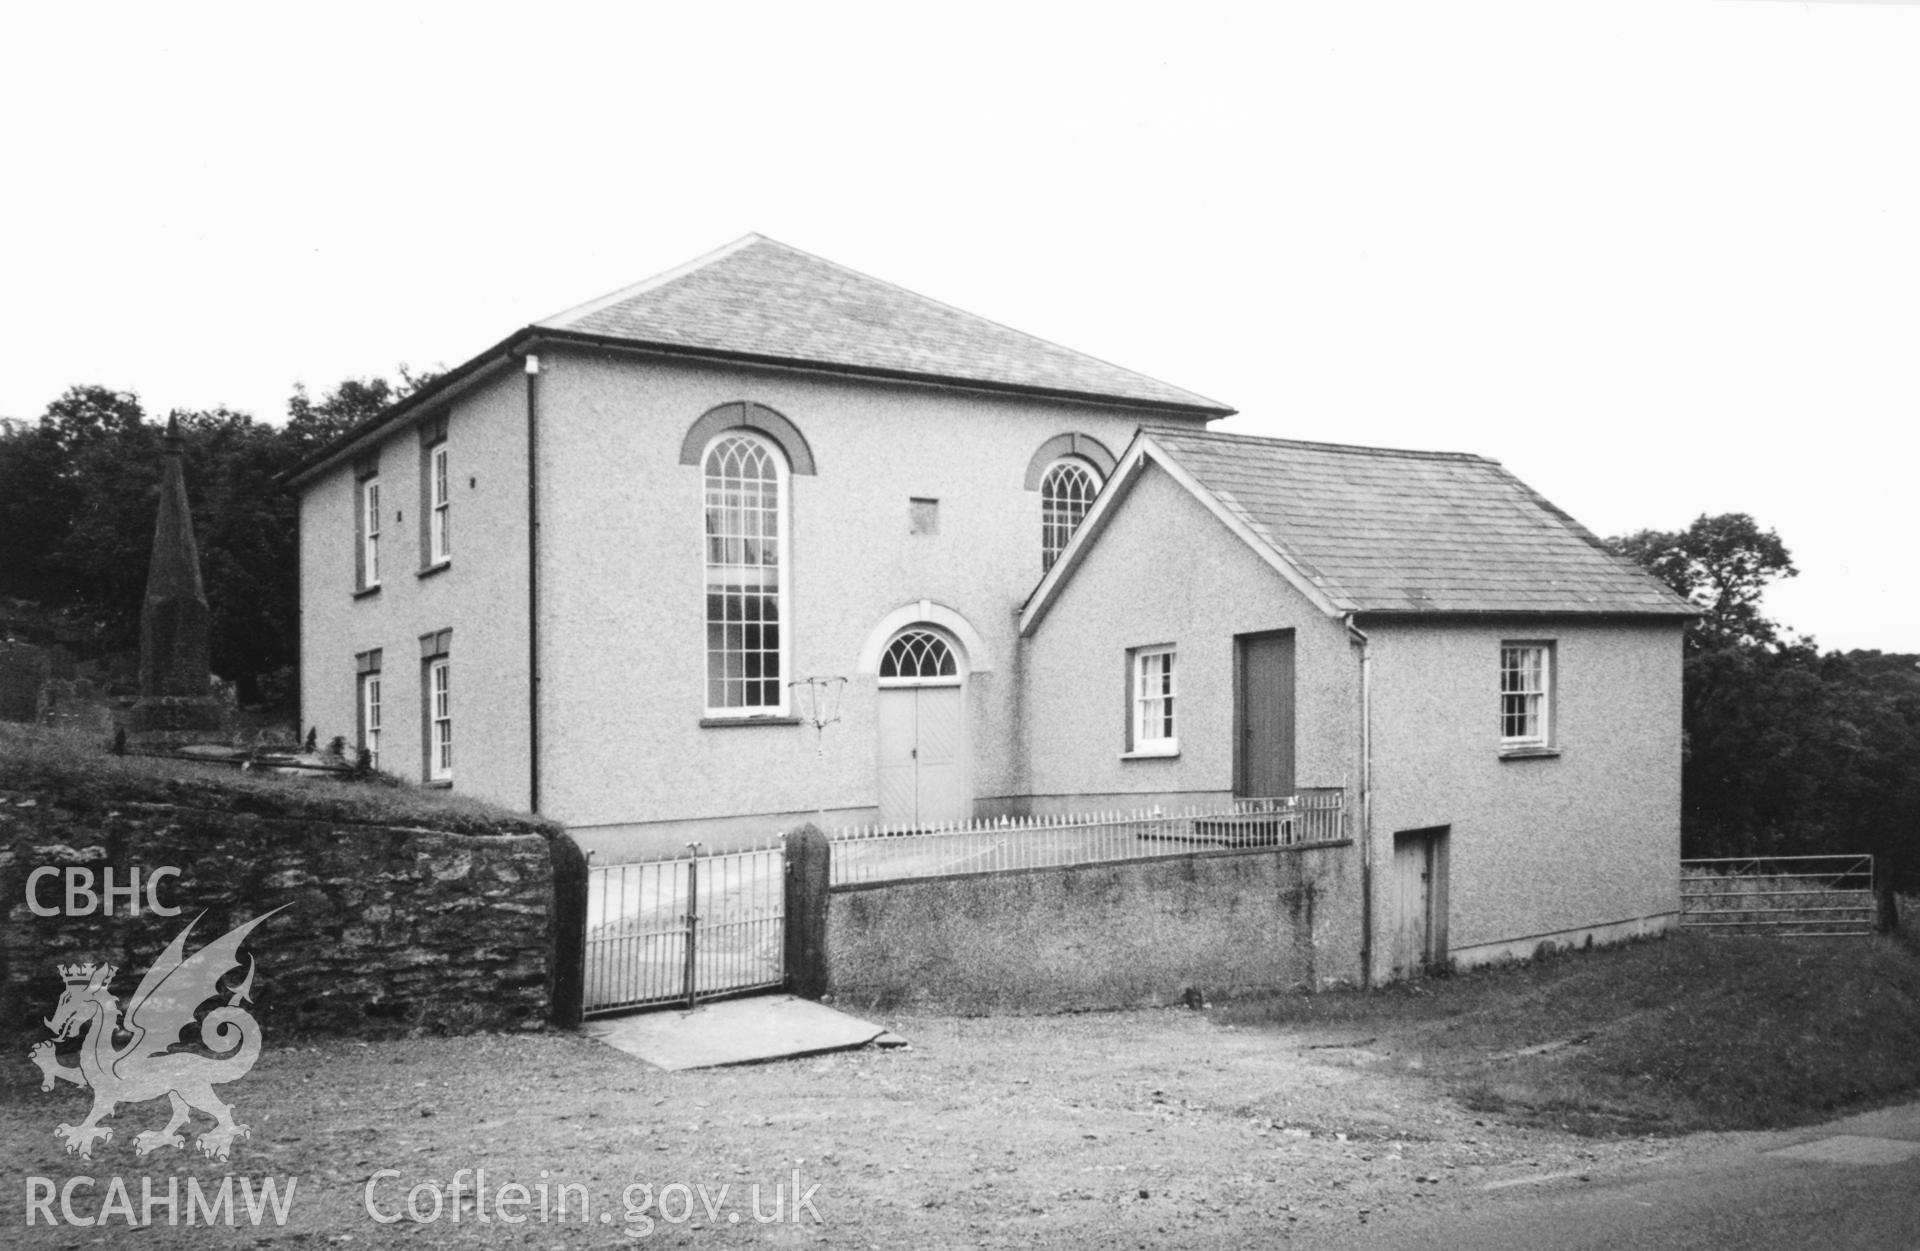 Digital copy of a black and white photograph showing an exterior view of Rhydyceisiad Welsh Independent Chapel,  taken by Robert Scourfield, 1996.